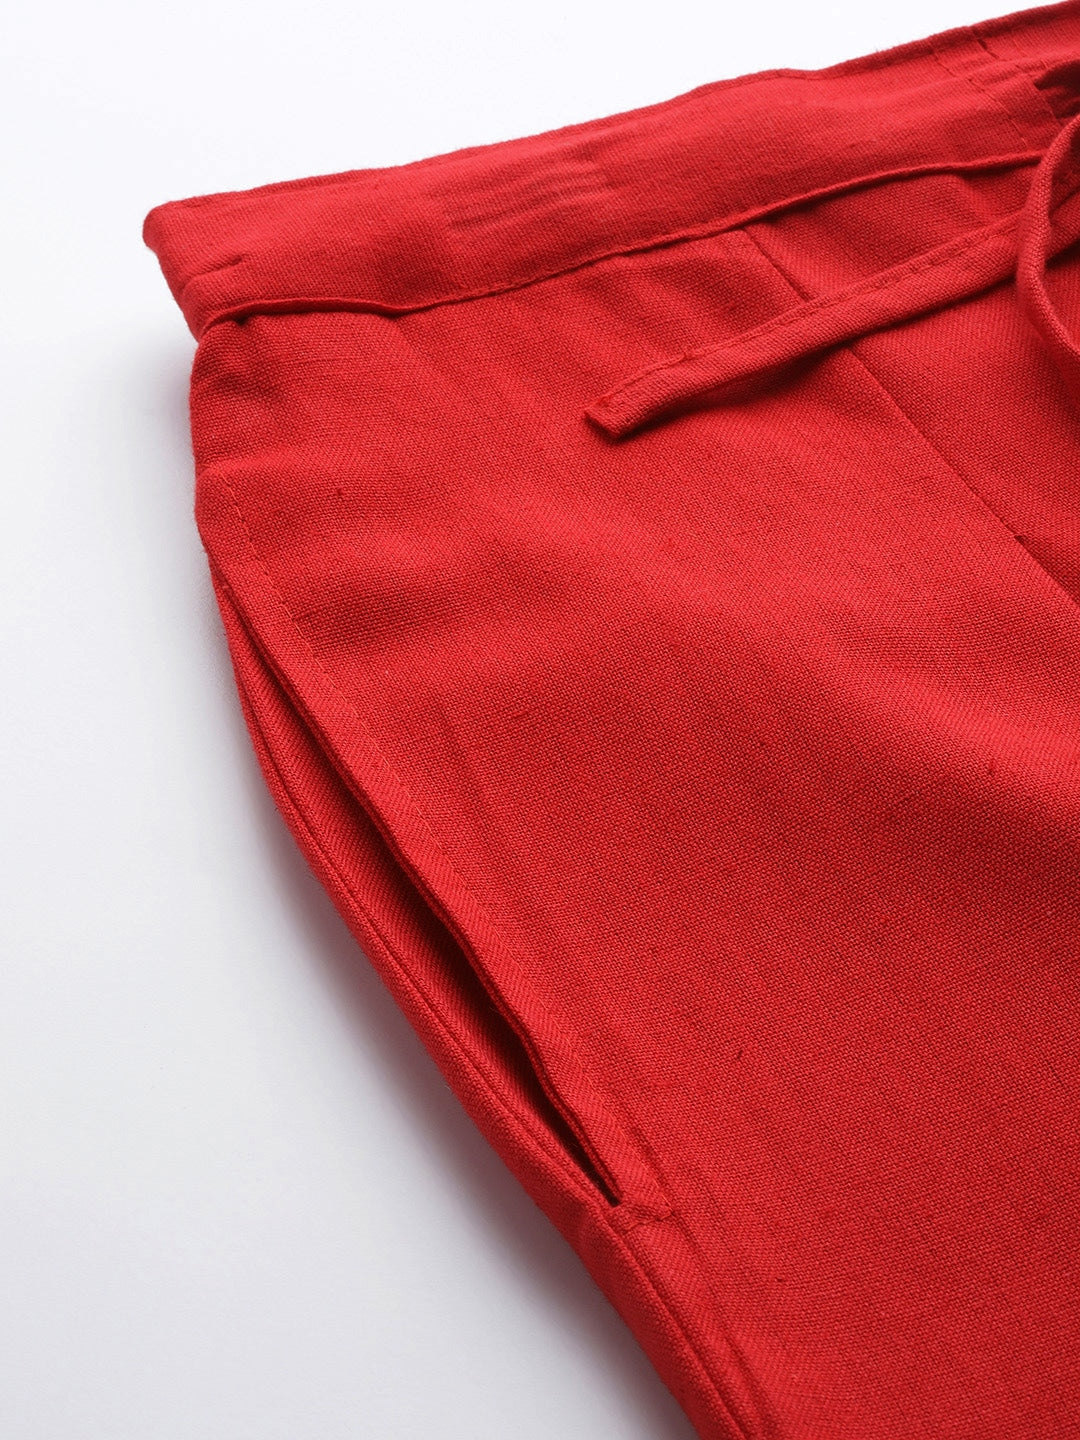 Red Cotton Fit Trousers-Yufta Store-4206PNTRDS